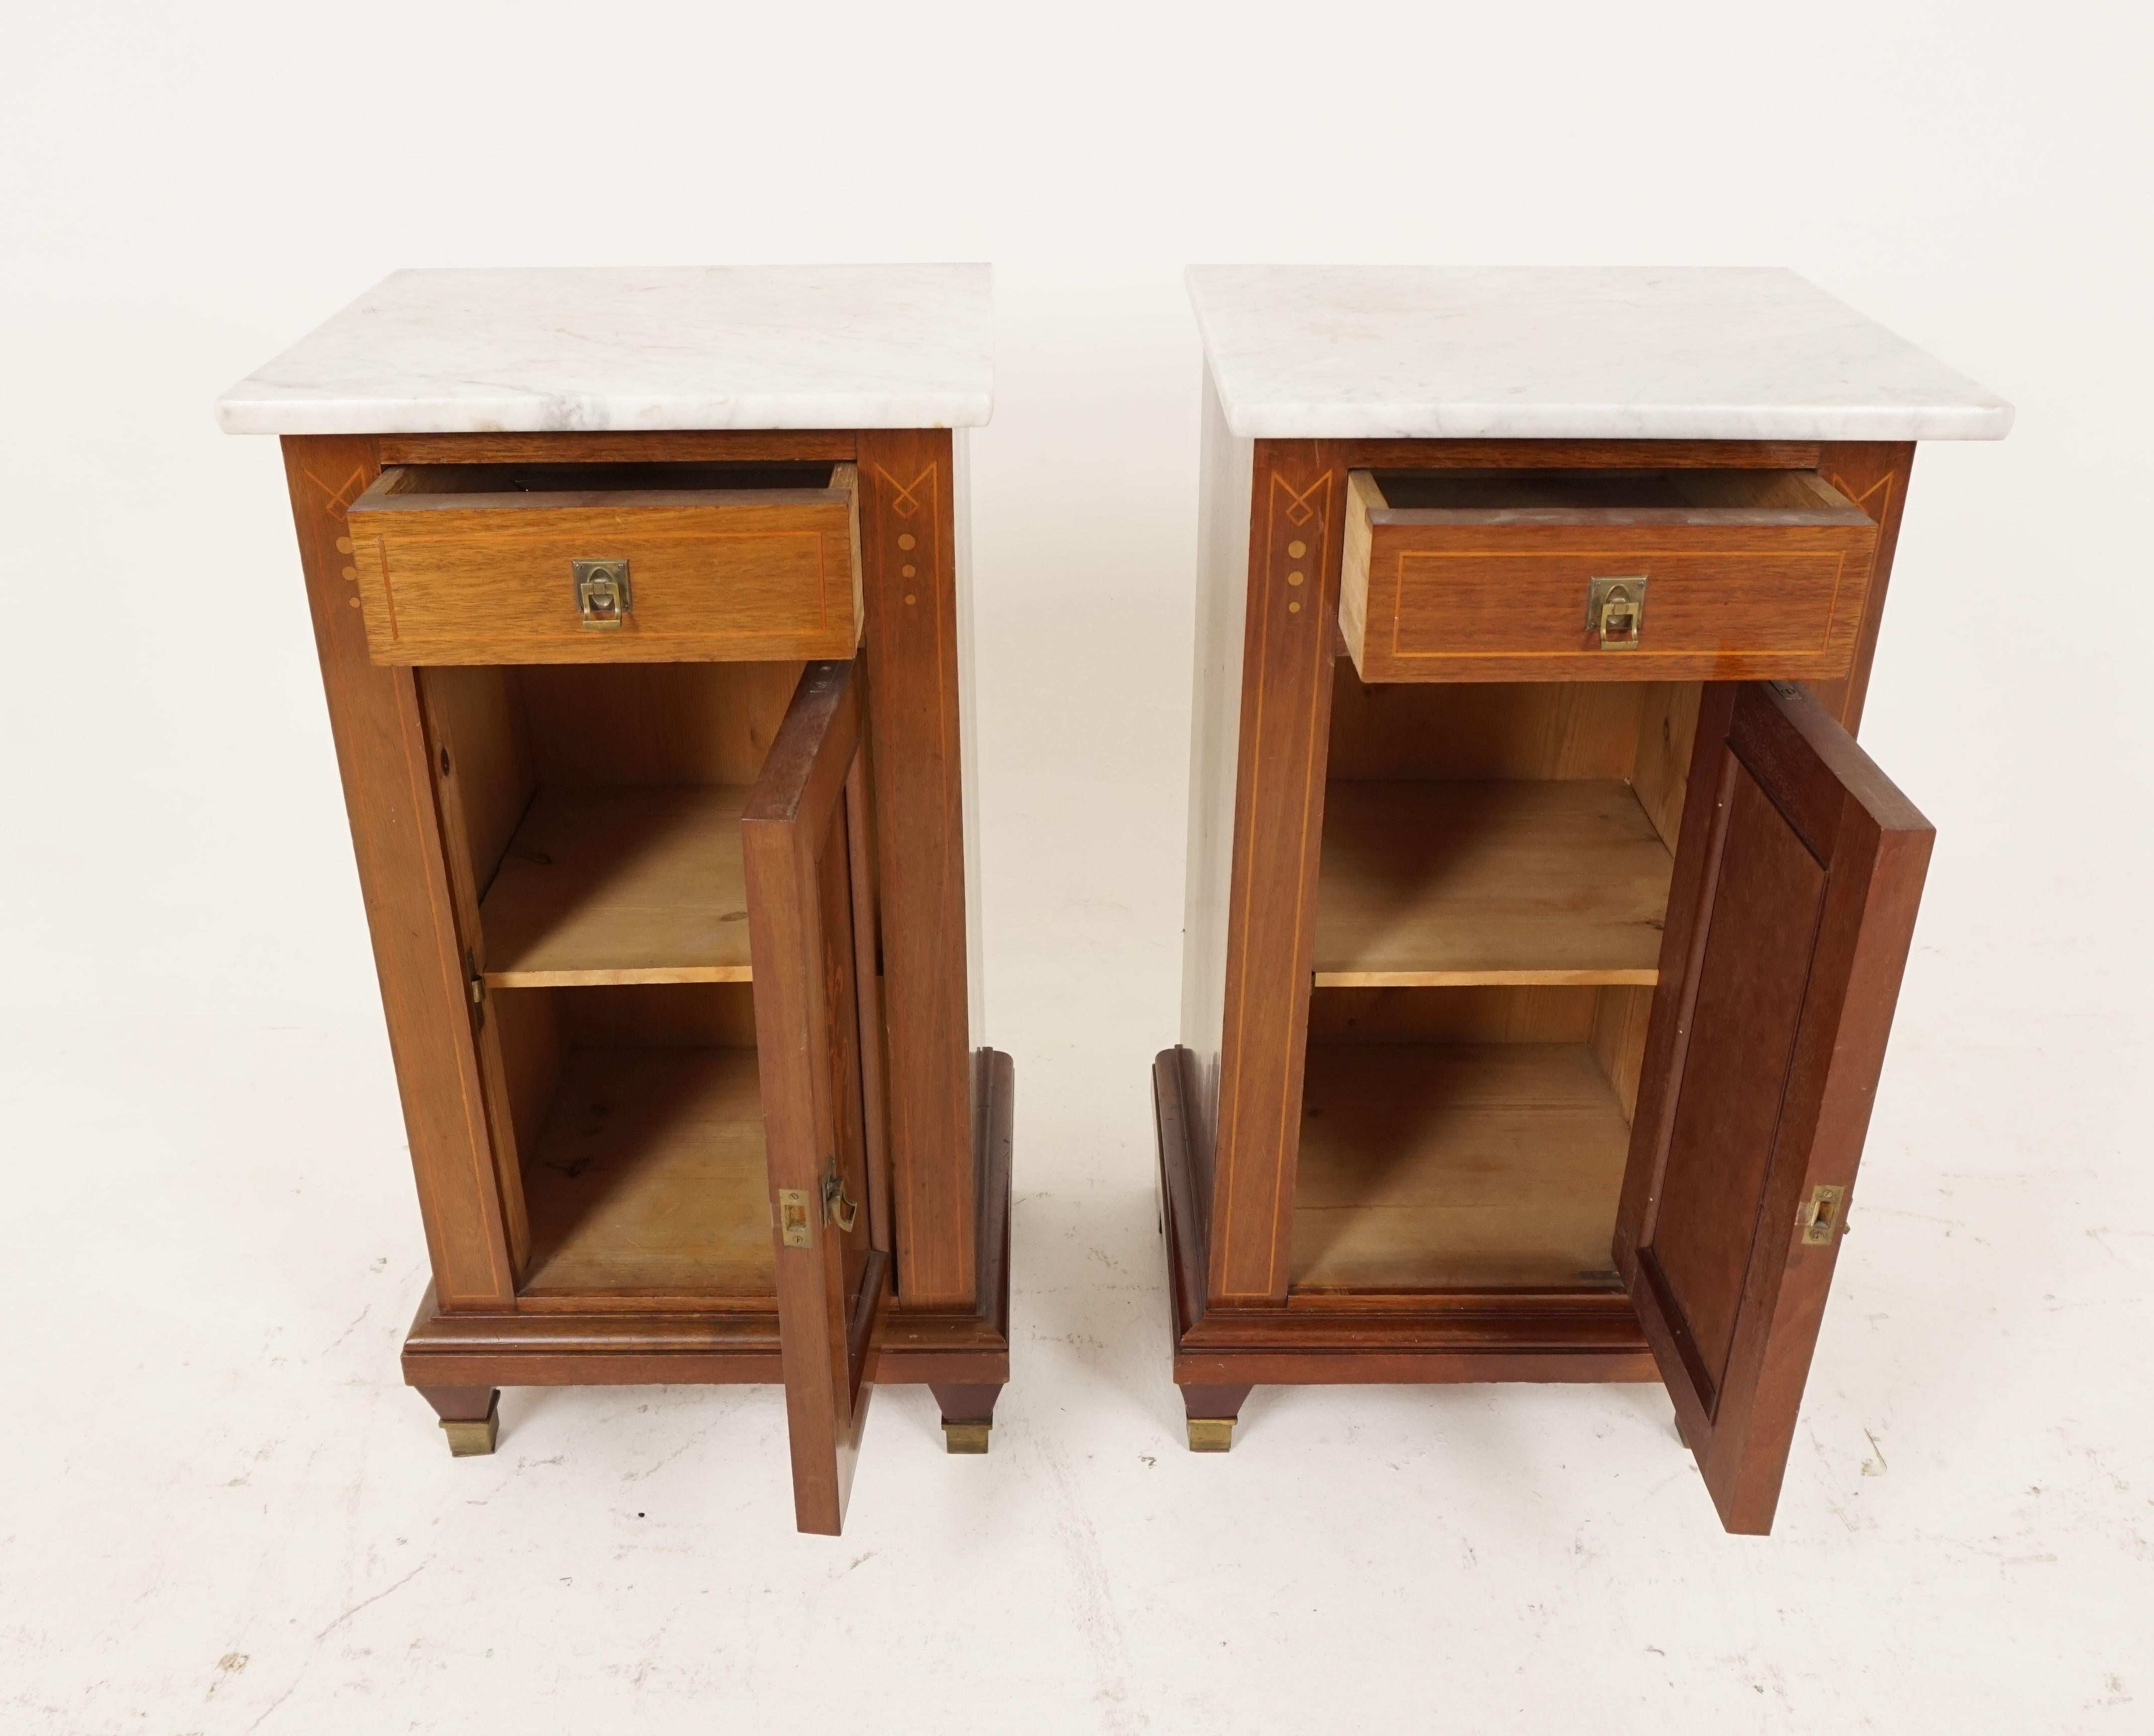 Antique Pair of Nightstands, Continental Inlaid Mahogany Bedside, Scotland 1900, B2088

Scotland 1900
Solid Mahogany + Veneer
Original Finish
Original Veined Marble Tops 
Inlaid Drawer Below With Original Brass Pull
Inlaid Paneled Door
Opens To